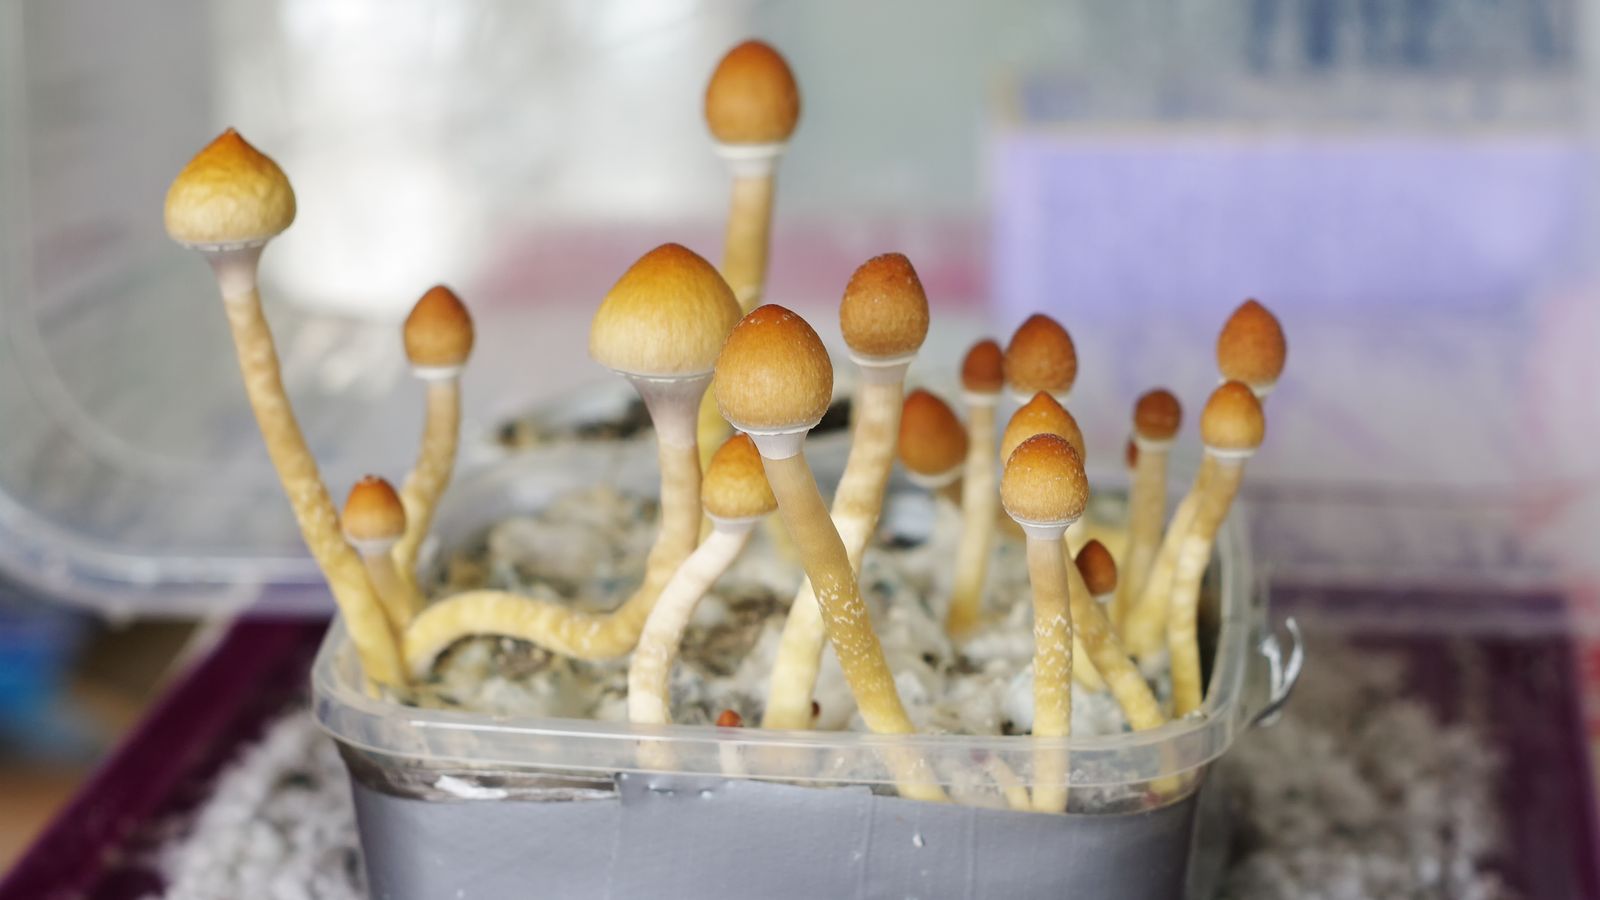 Terminally ill Canadians win right to use magic mushrooms for end-of-life  stress | World News | Sky News